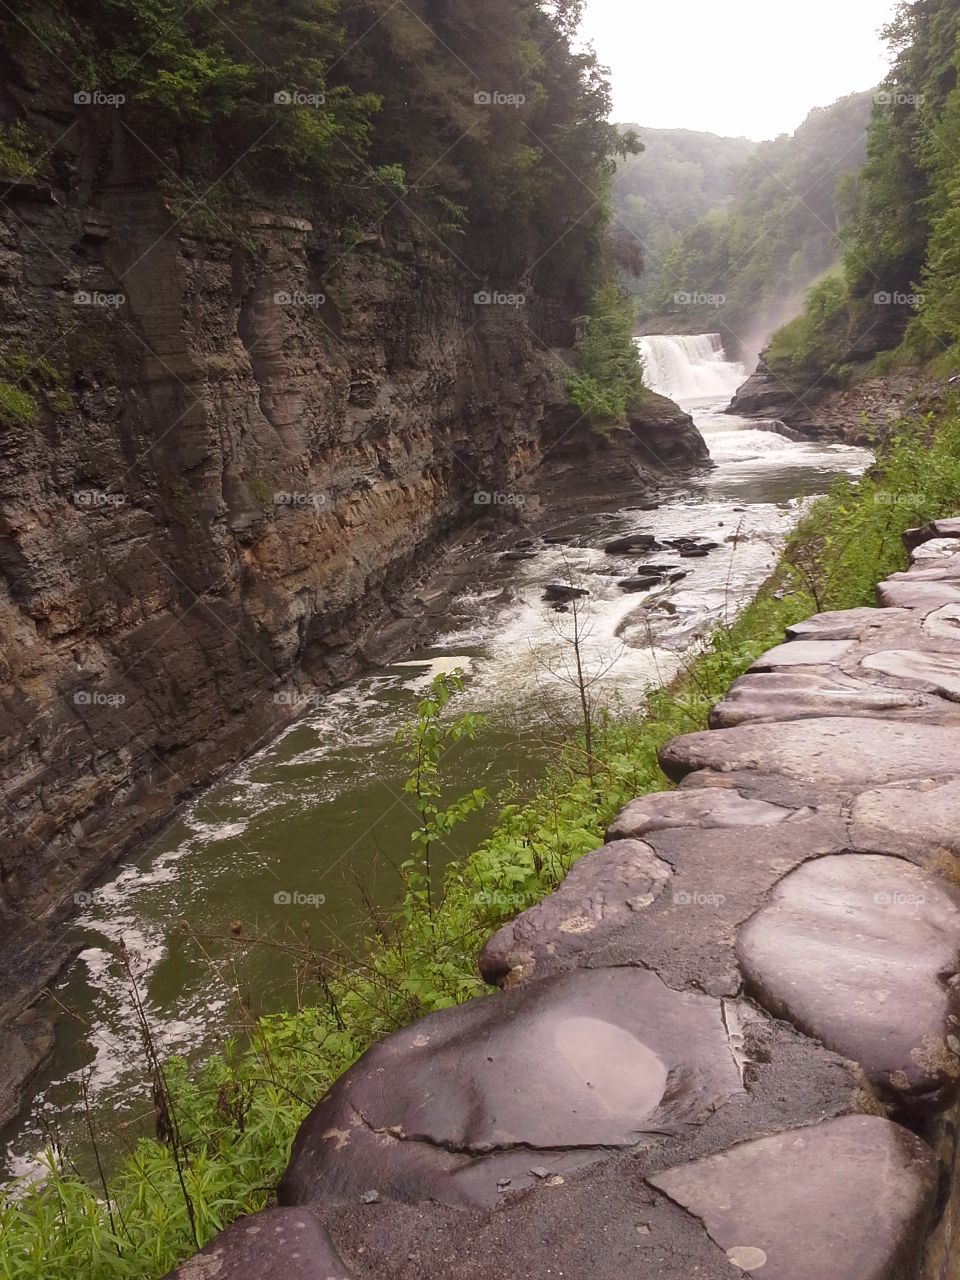 Lower Falls Down River at Letchworth State Park